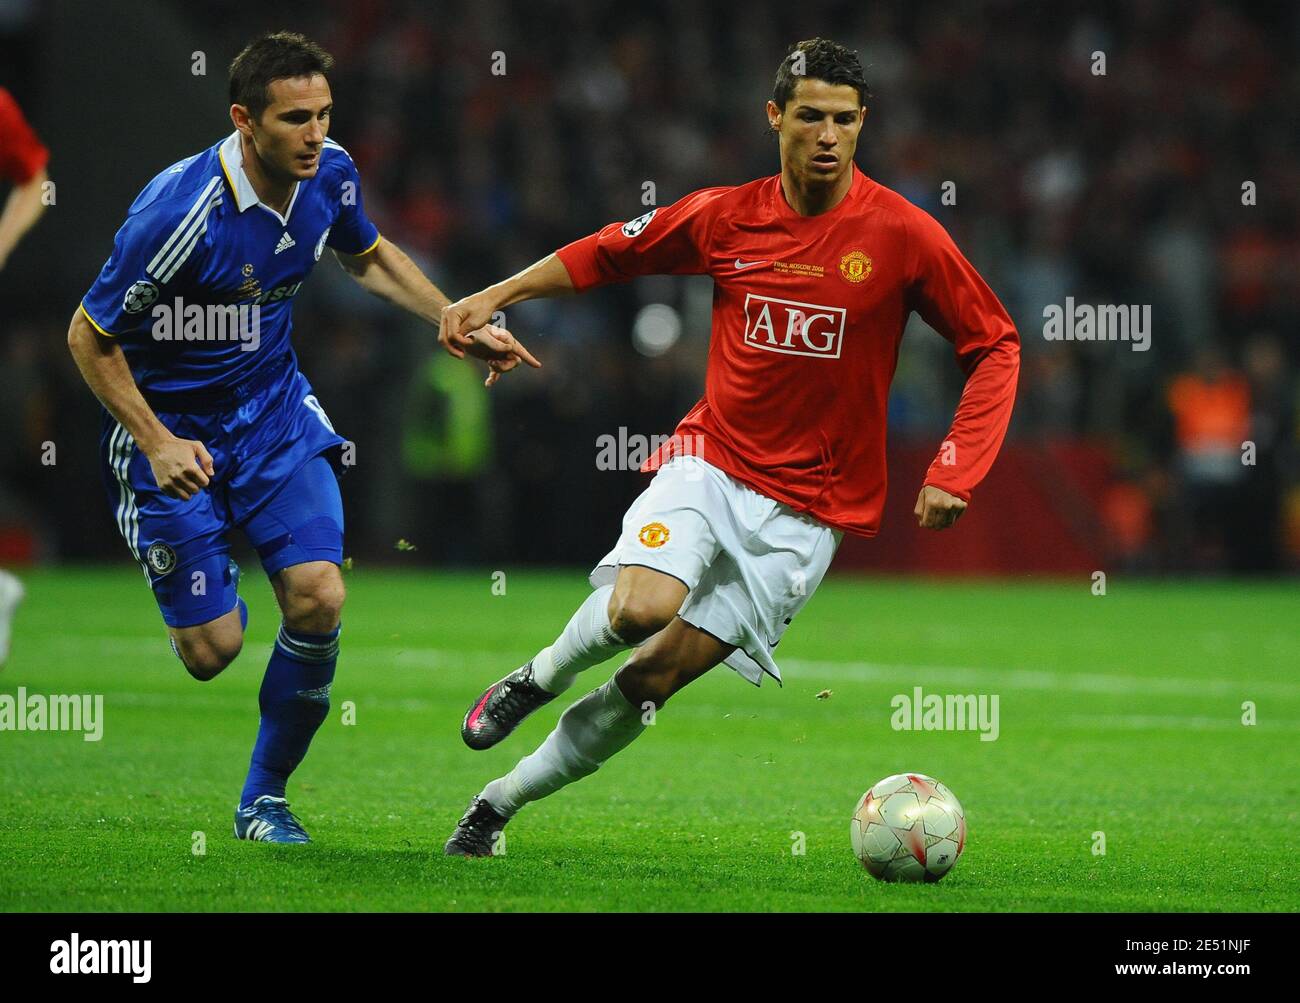 MAnchester United's Cristiano Ronaldo challenges Chelsea's Frank Lampard  during the UEFA Champions League Final Soccer match, Manchester United vs  Chelsea at the Luzhniki Stadium in Moscow, Russia on May 21, 2008. The